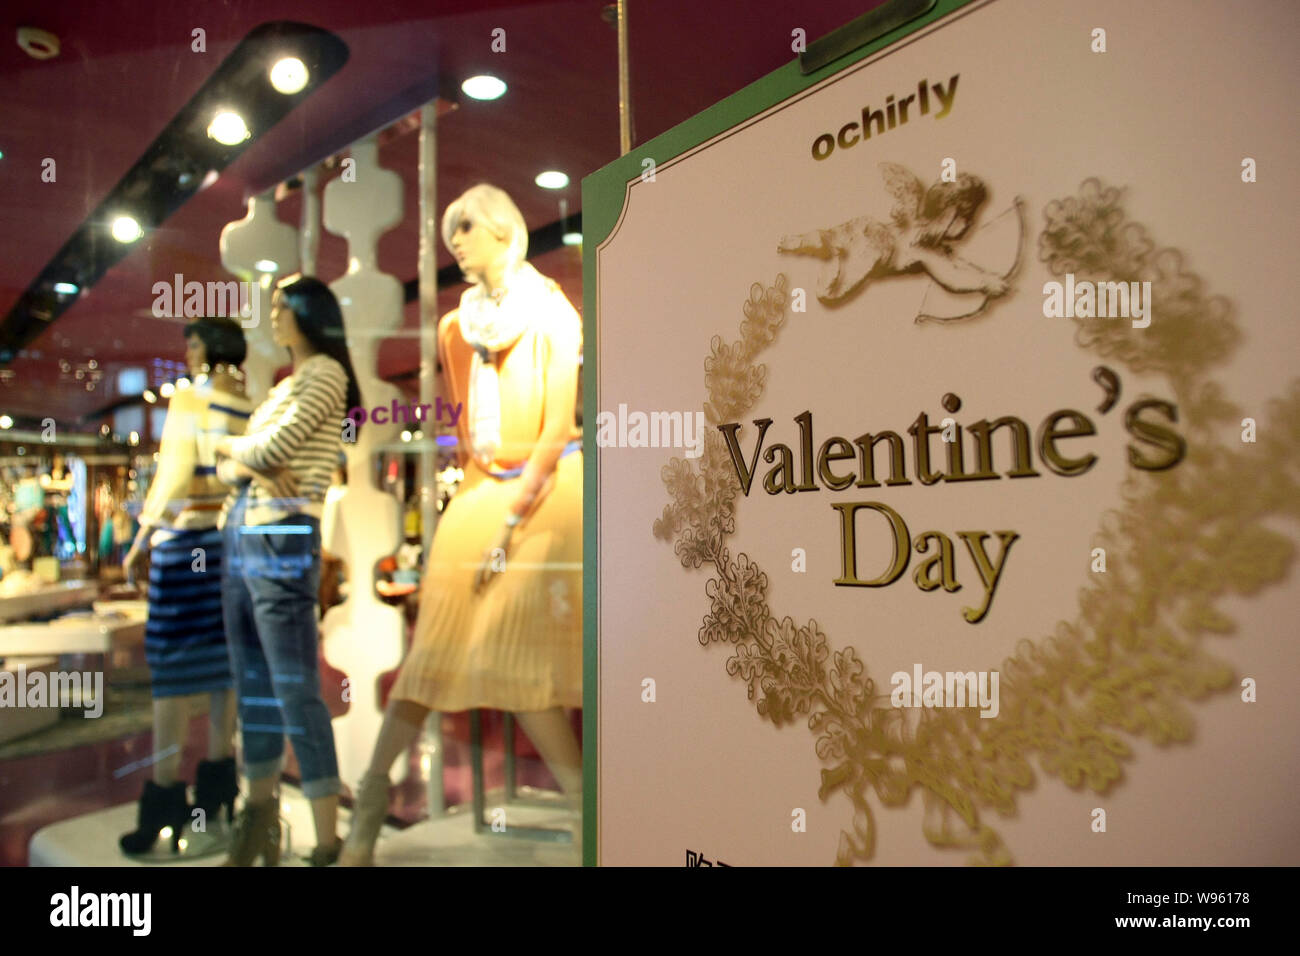 View of an Ochirly store in Shanghai, China, 13 February 2012. A